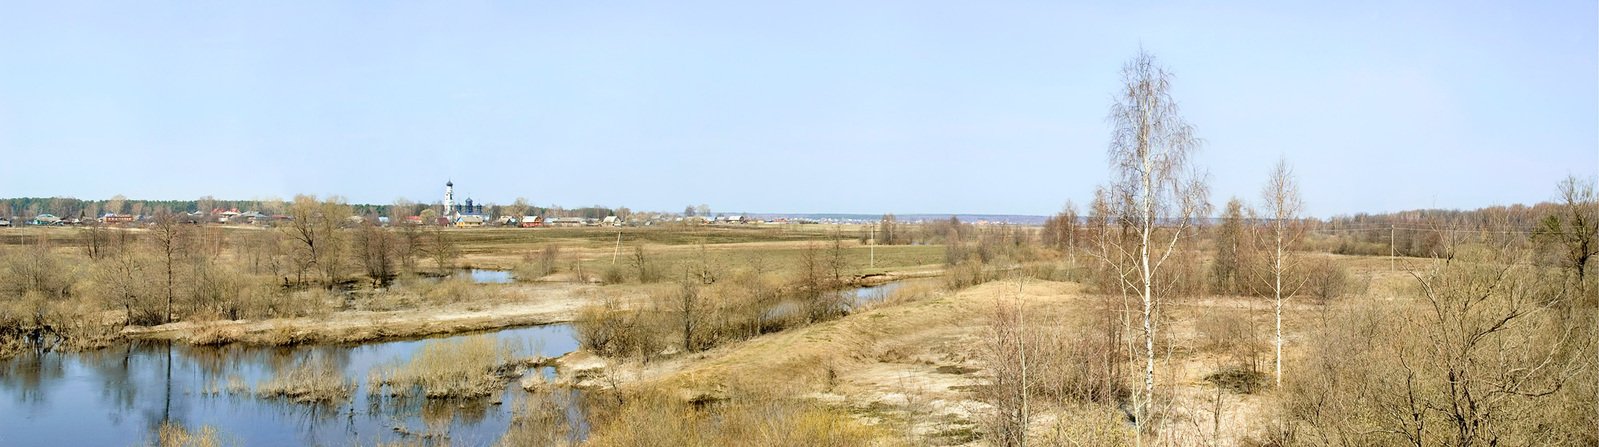 a large river runs through a field with dead trees